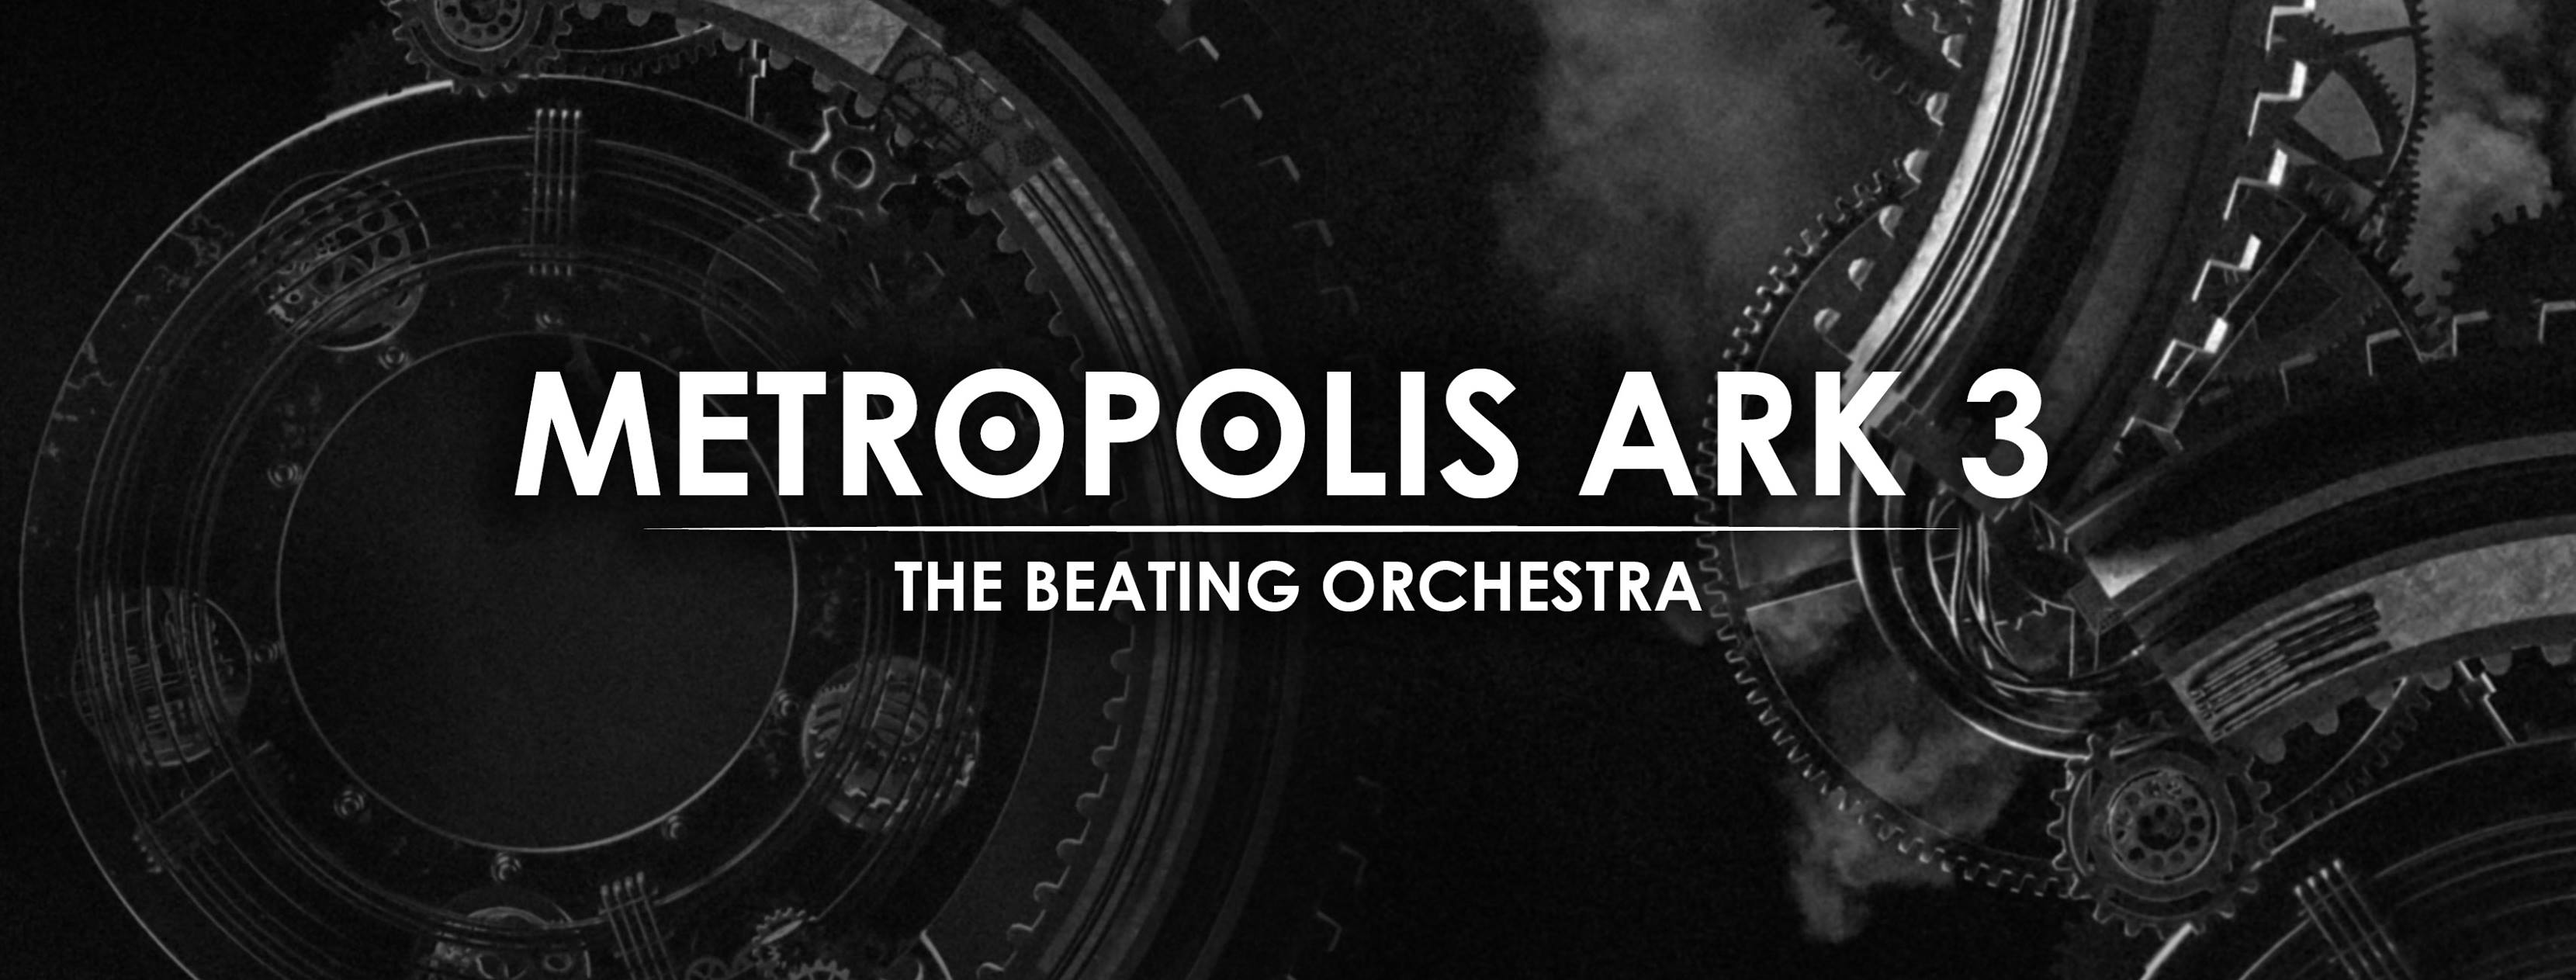 ​ METROPOLIS ARK 3 The Beating Orchestra